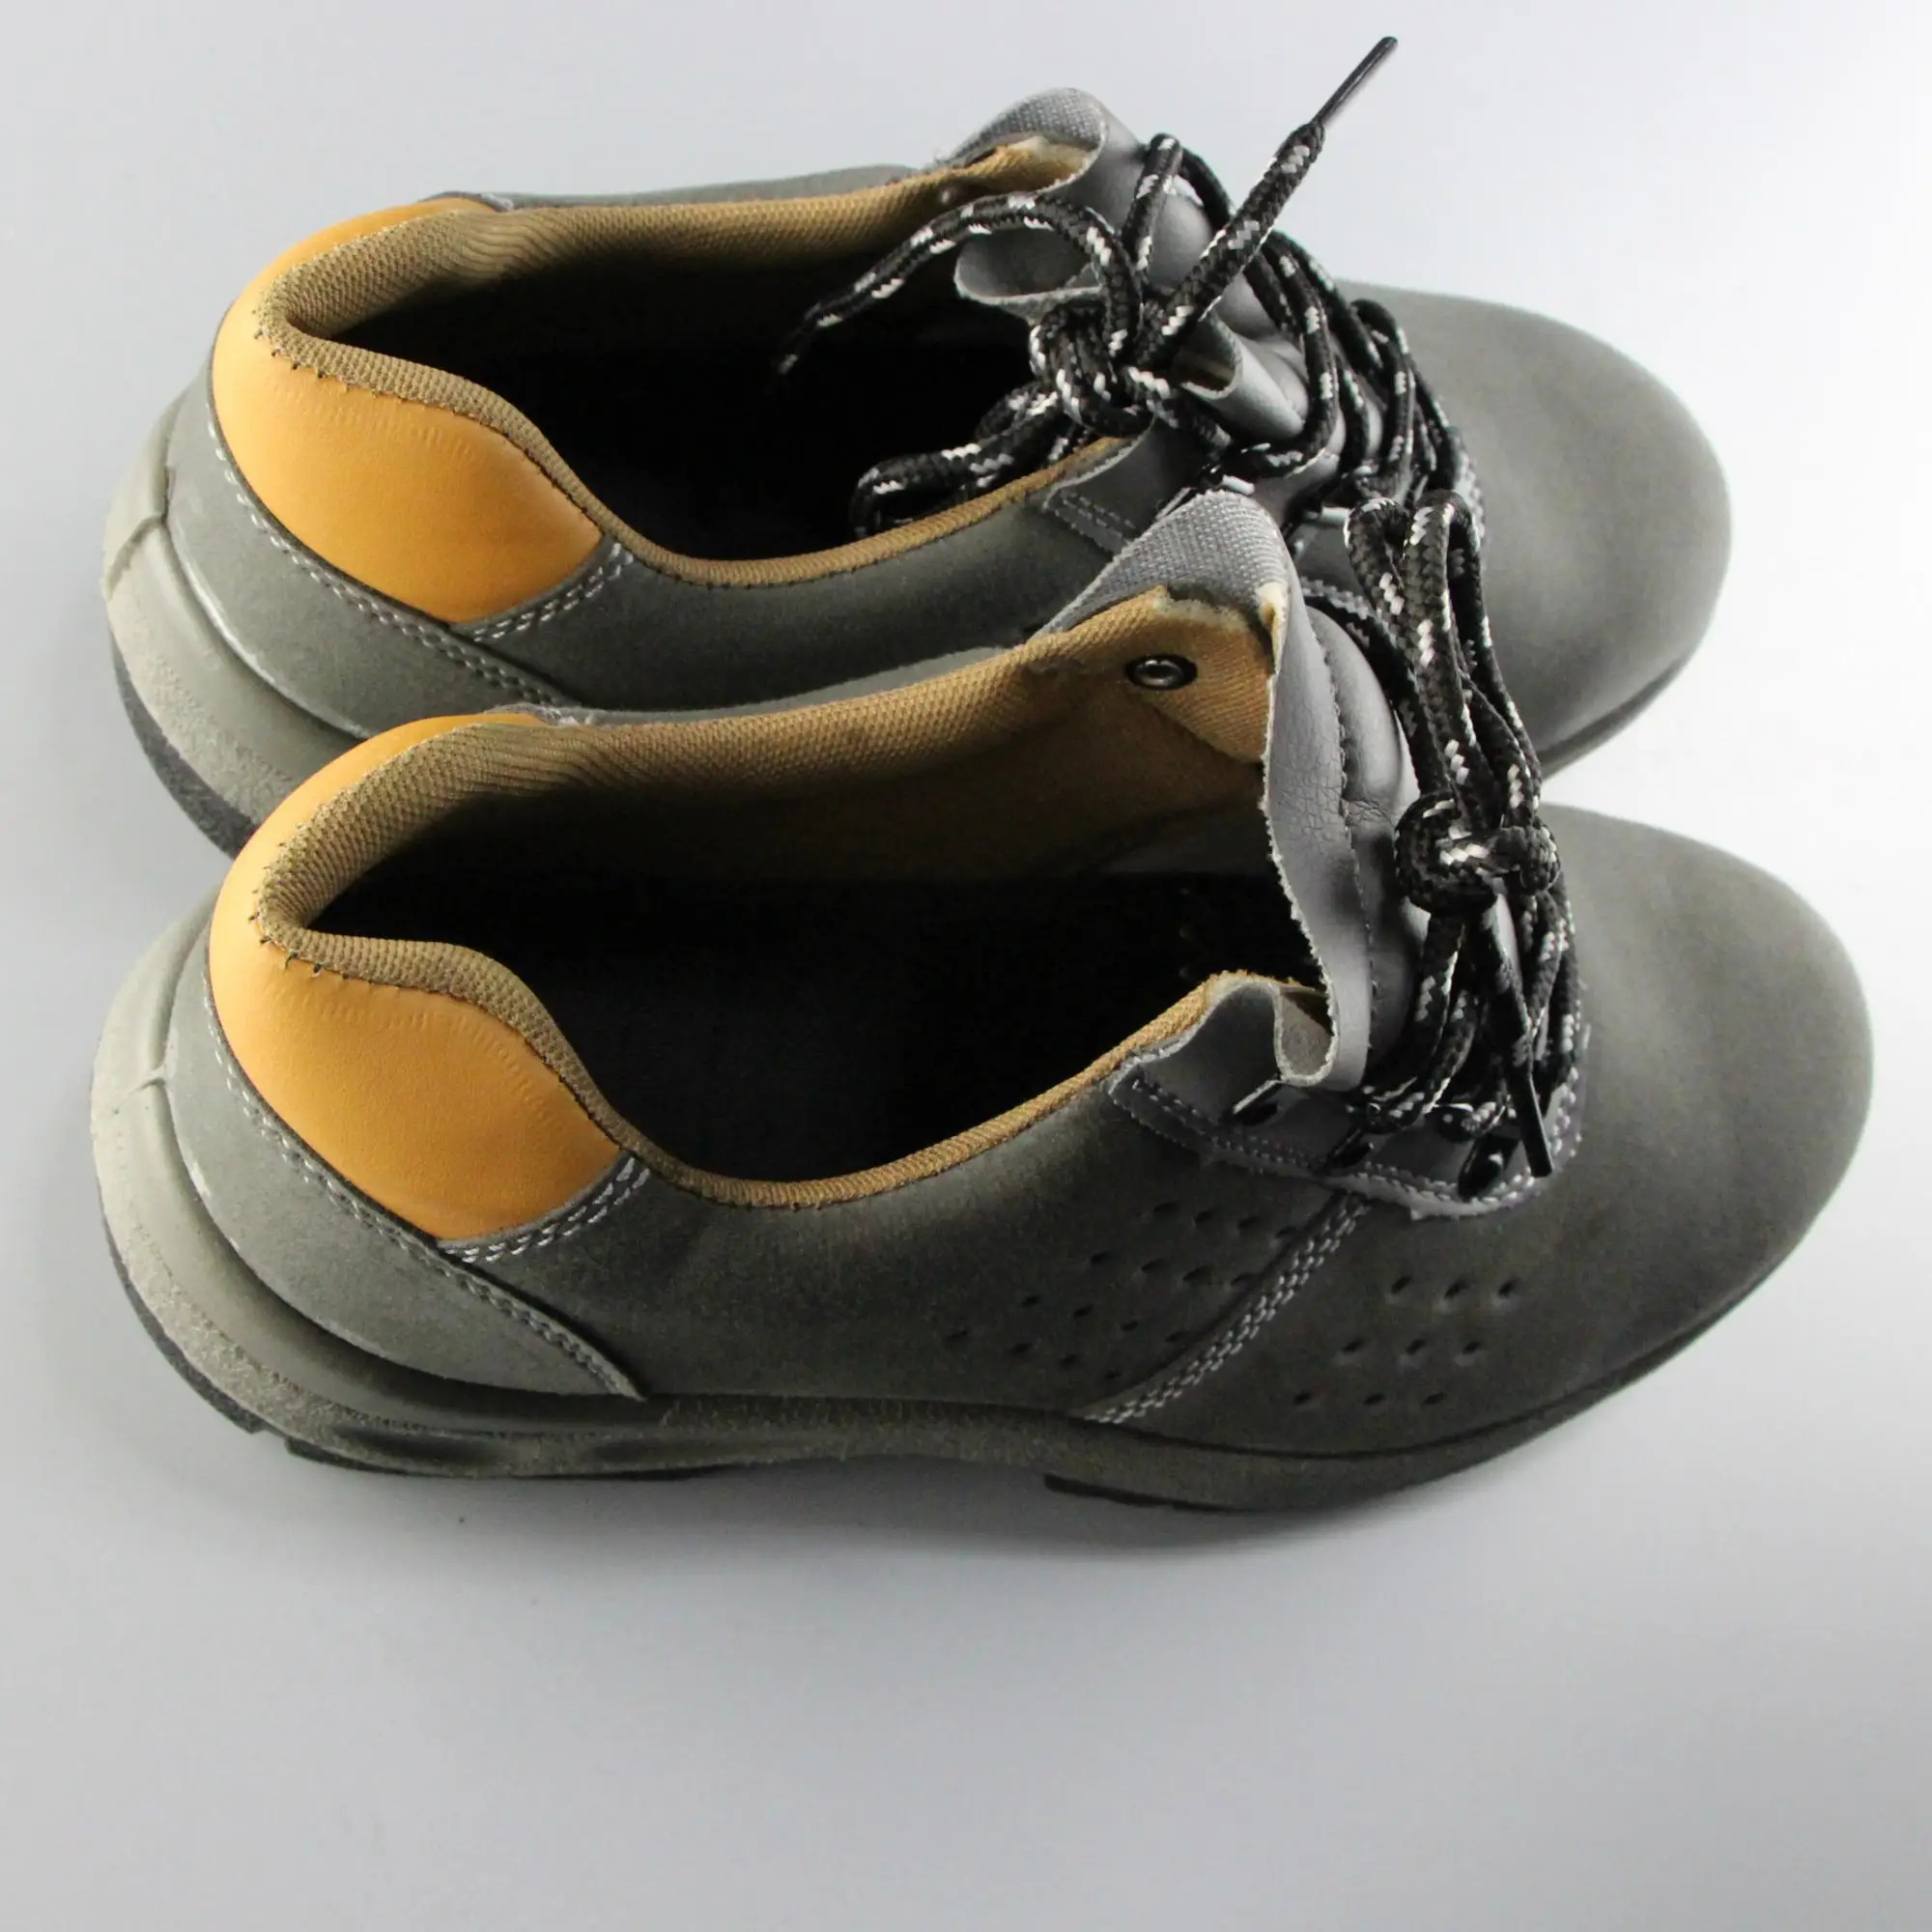 safety shoes with steel toe cap for visitors